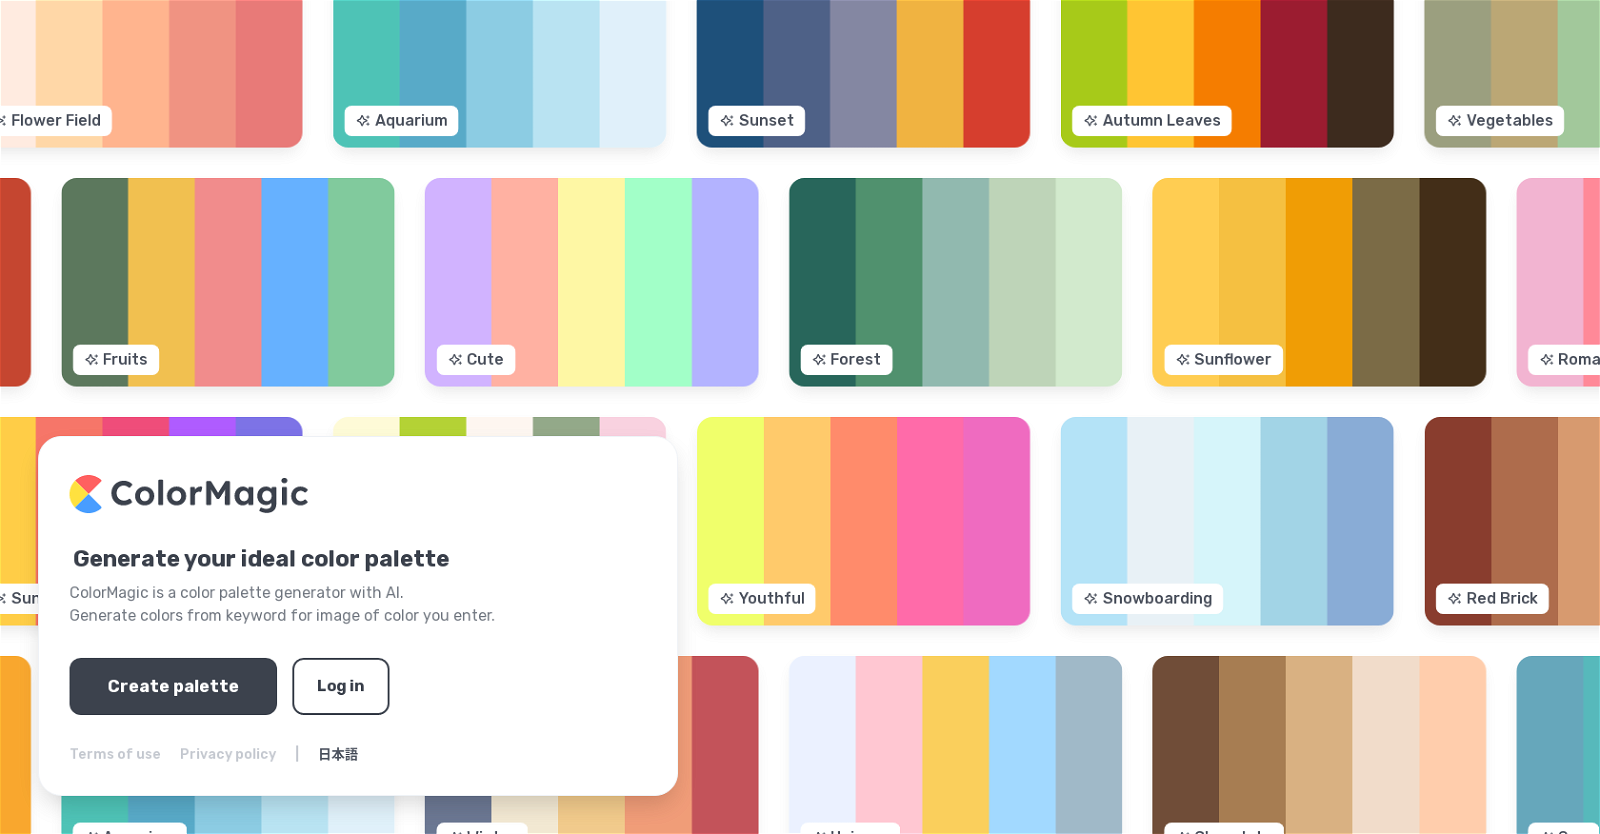 Artist uses AI to generate color palettes from text descriptions